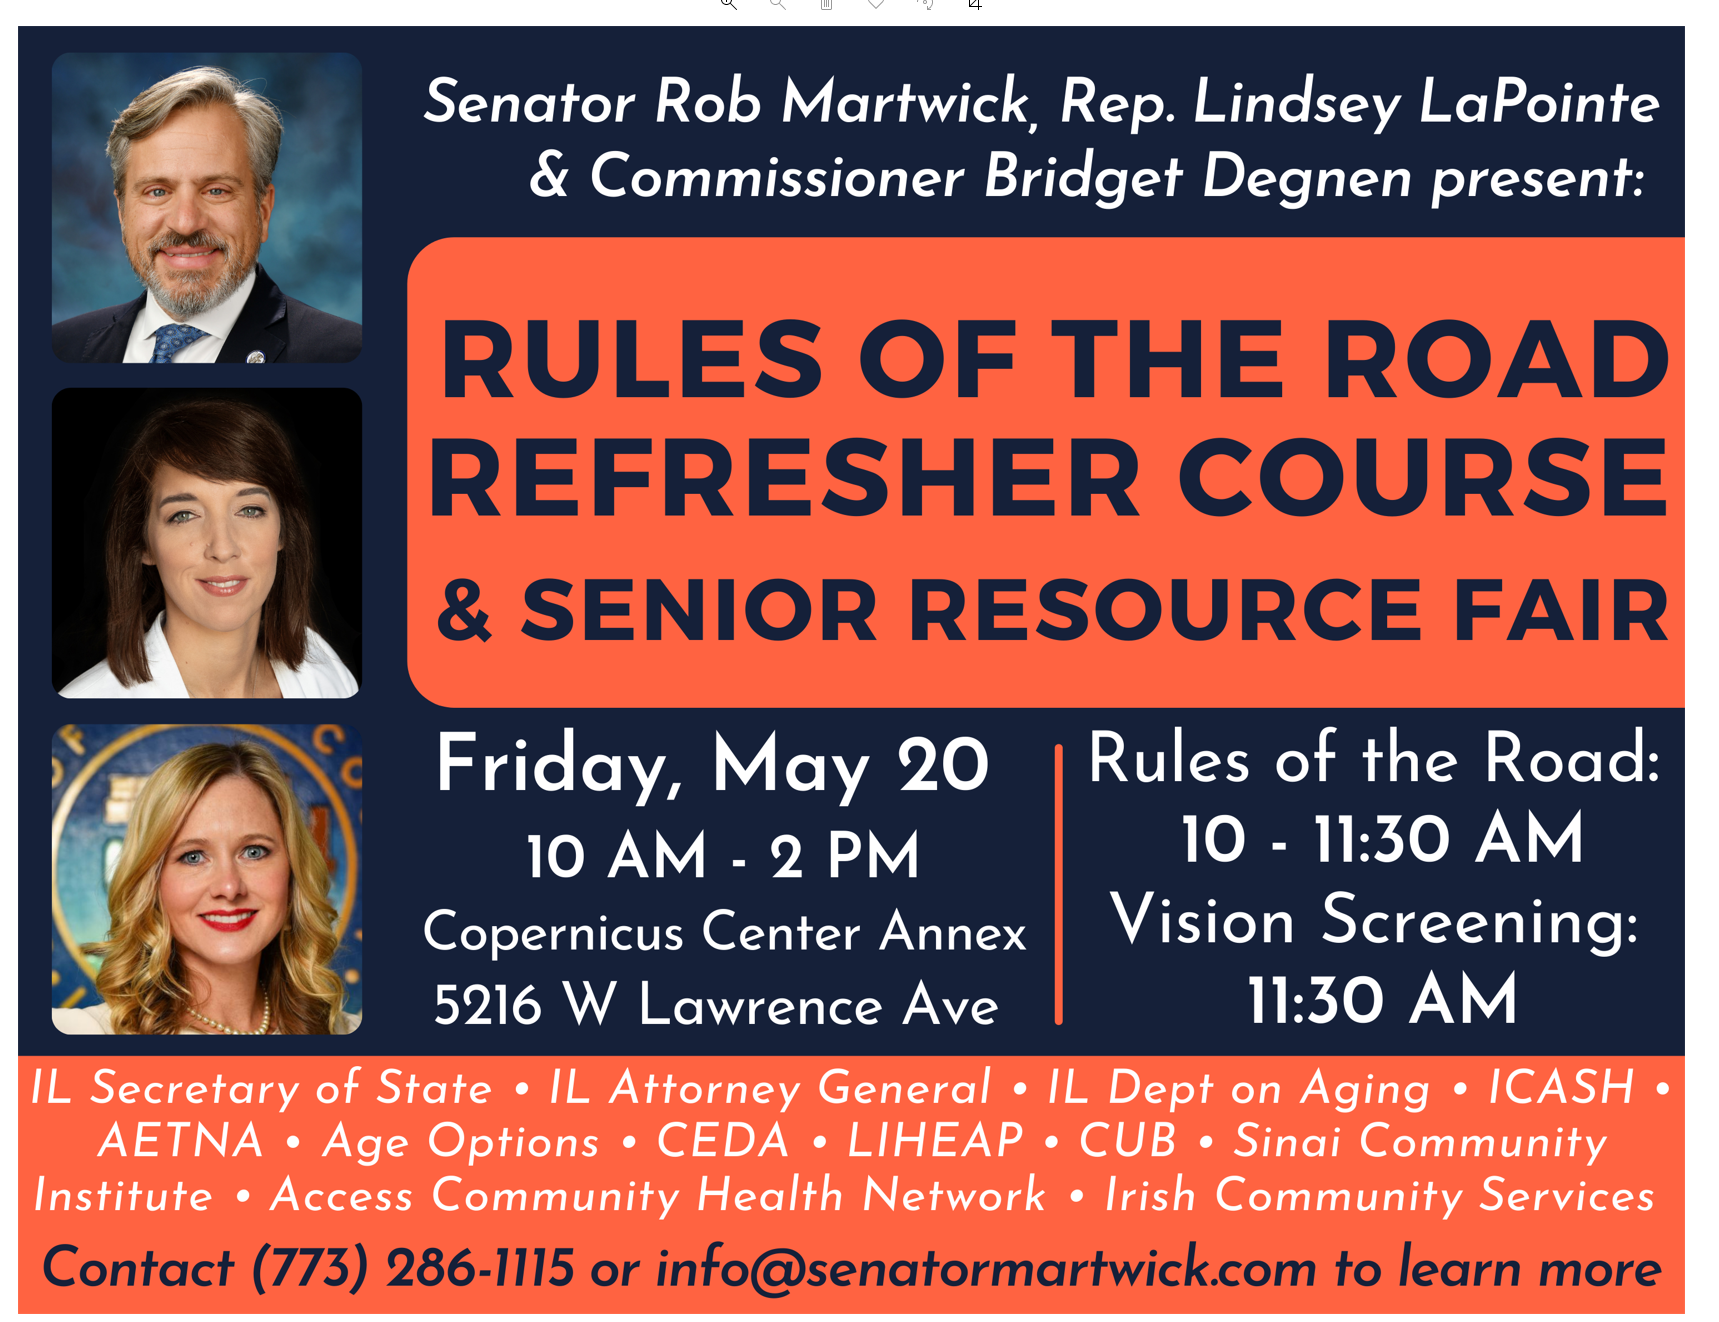 Rules of the Road Refresher and Senior Resource Fair May 20th event